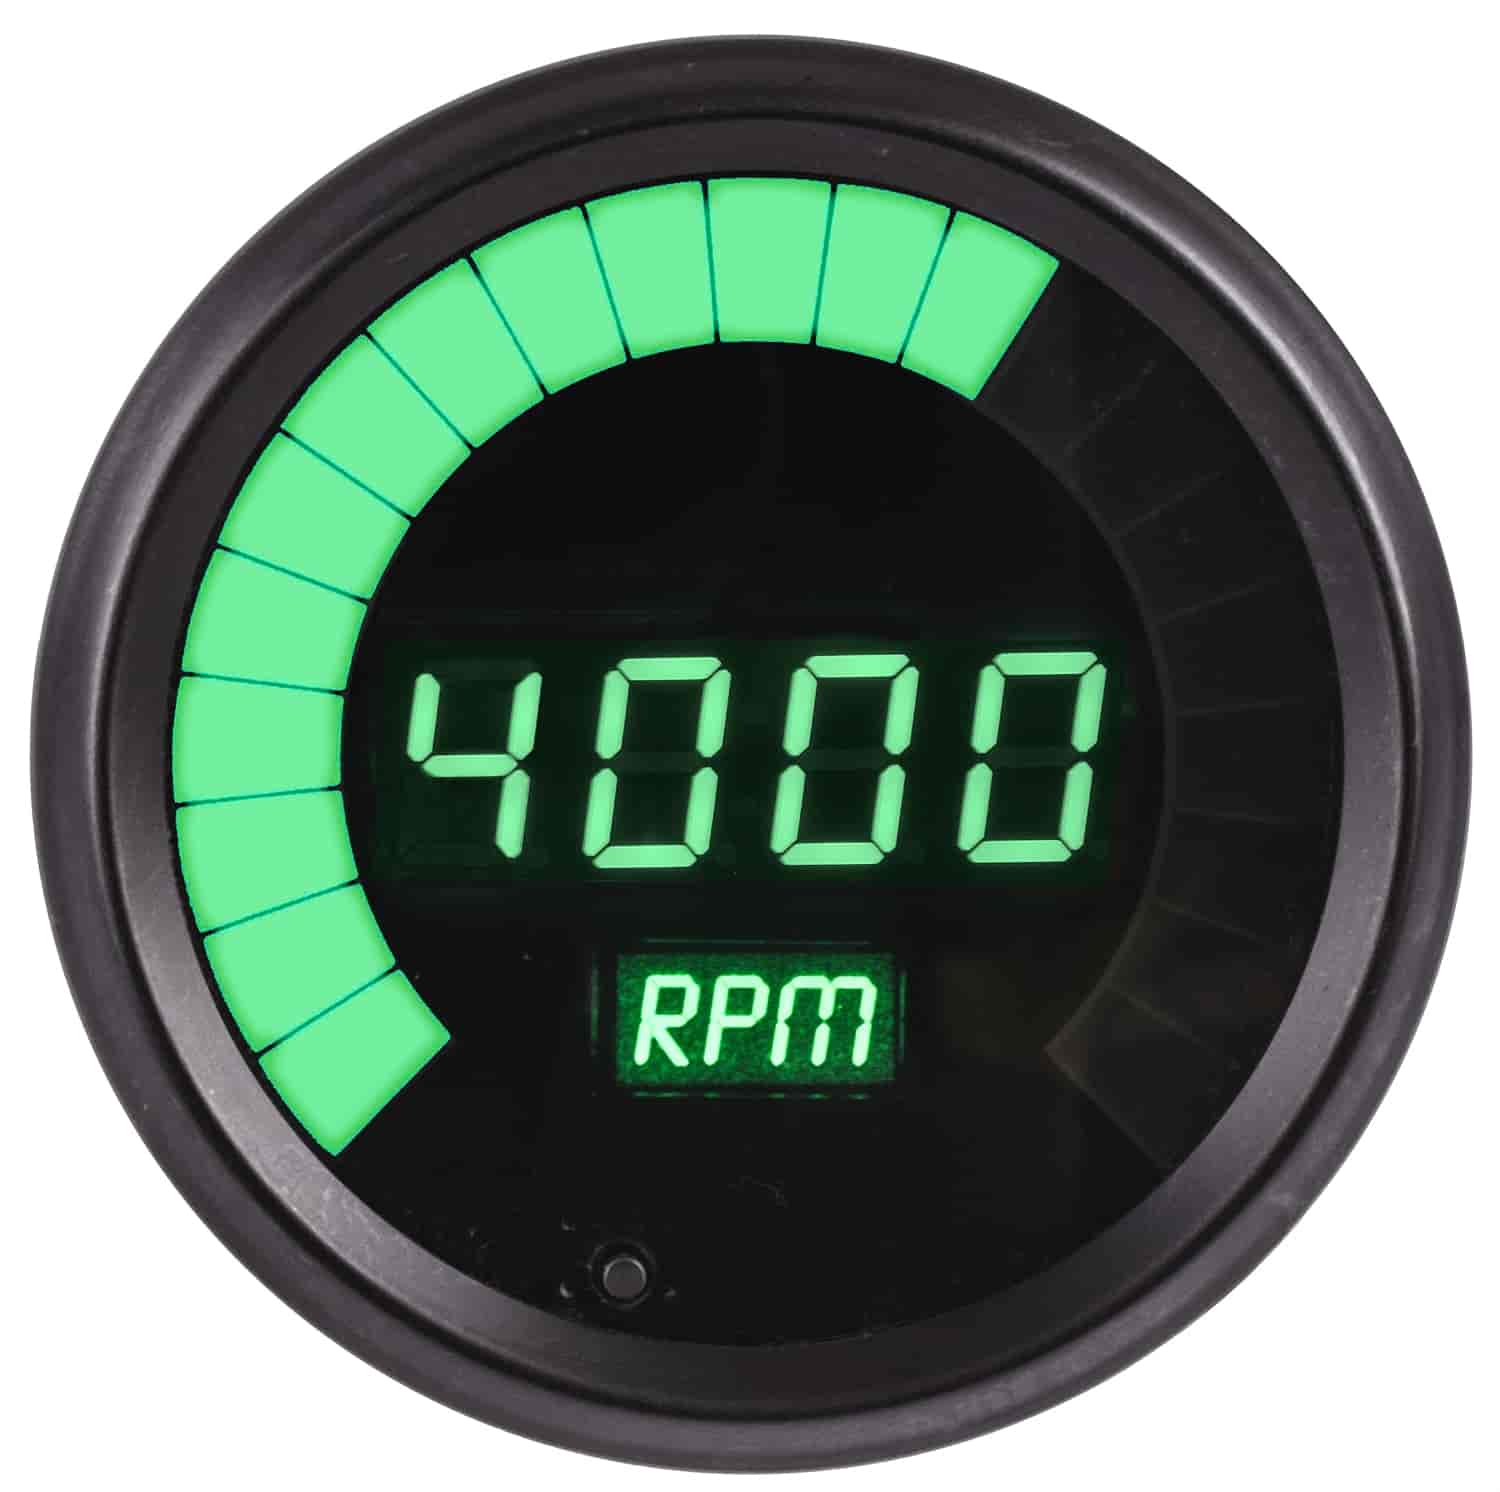 JEGS 41454: Tachometer | LED Digital | Bar Graph | 0-9900 rpm | 3 3/8 in.  Diameter | Microprocessor Controlled | Peak RPM Memory Recall | Night  Dimming | Black Face\Bezel | Green Numbers & Bar Graph - JEGS High  Performance